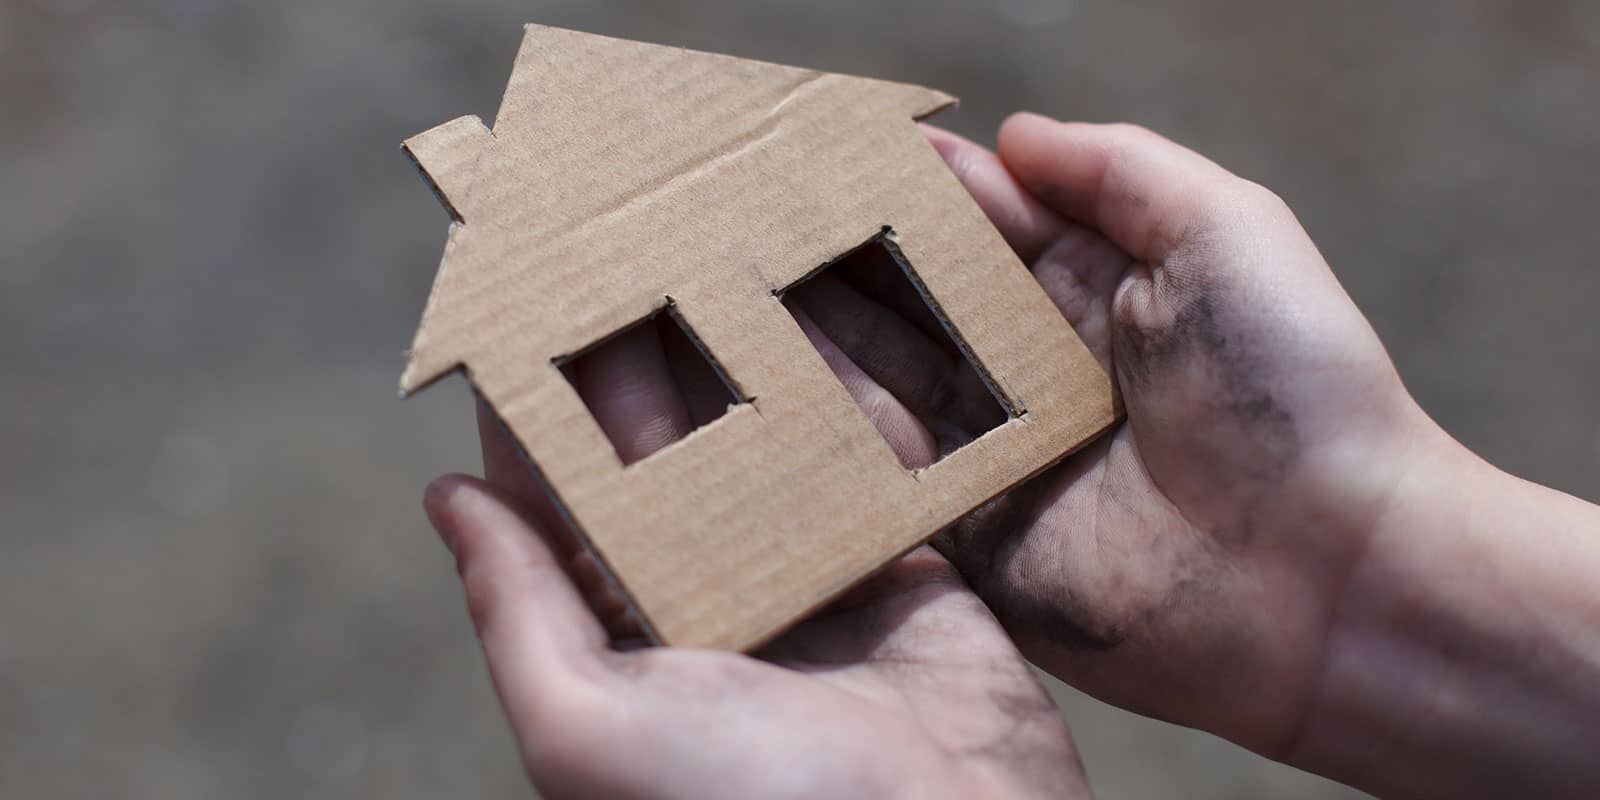 A close-up of a person holding a cut-out cardboard house in their hands